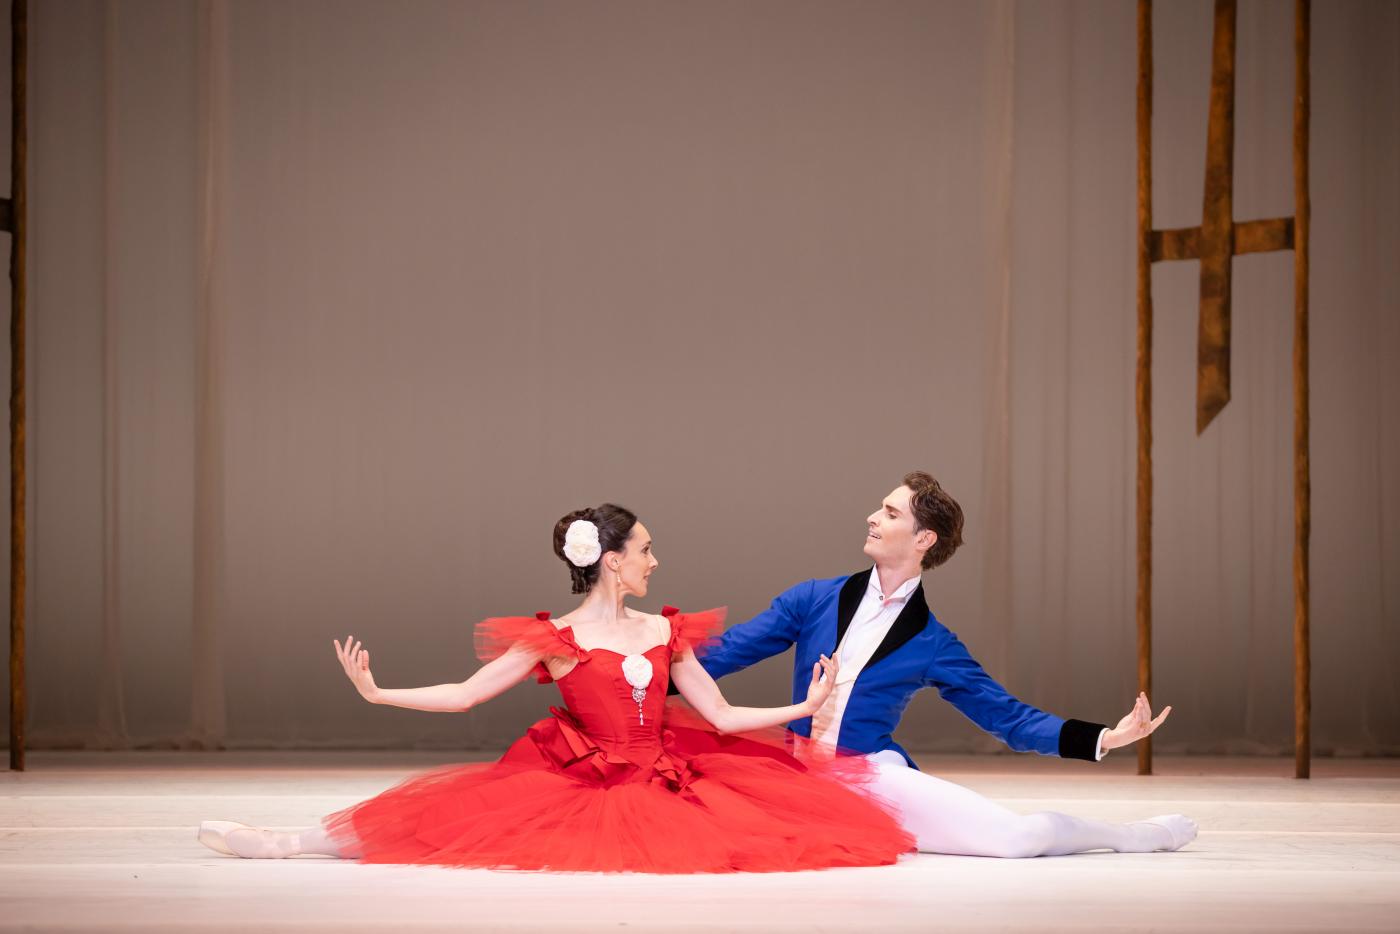 3. A.Harris (Marguerite) and N.Brook (Armand), “Marguerite and Armand” by F.Ashton, The Australian Ballet 2023 © D.Boud 